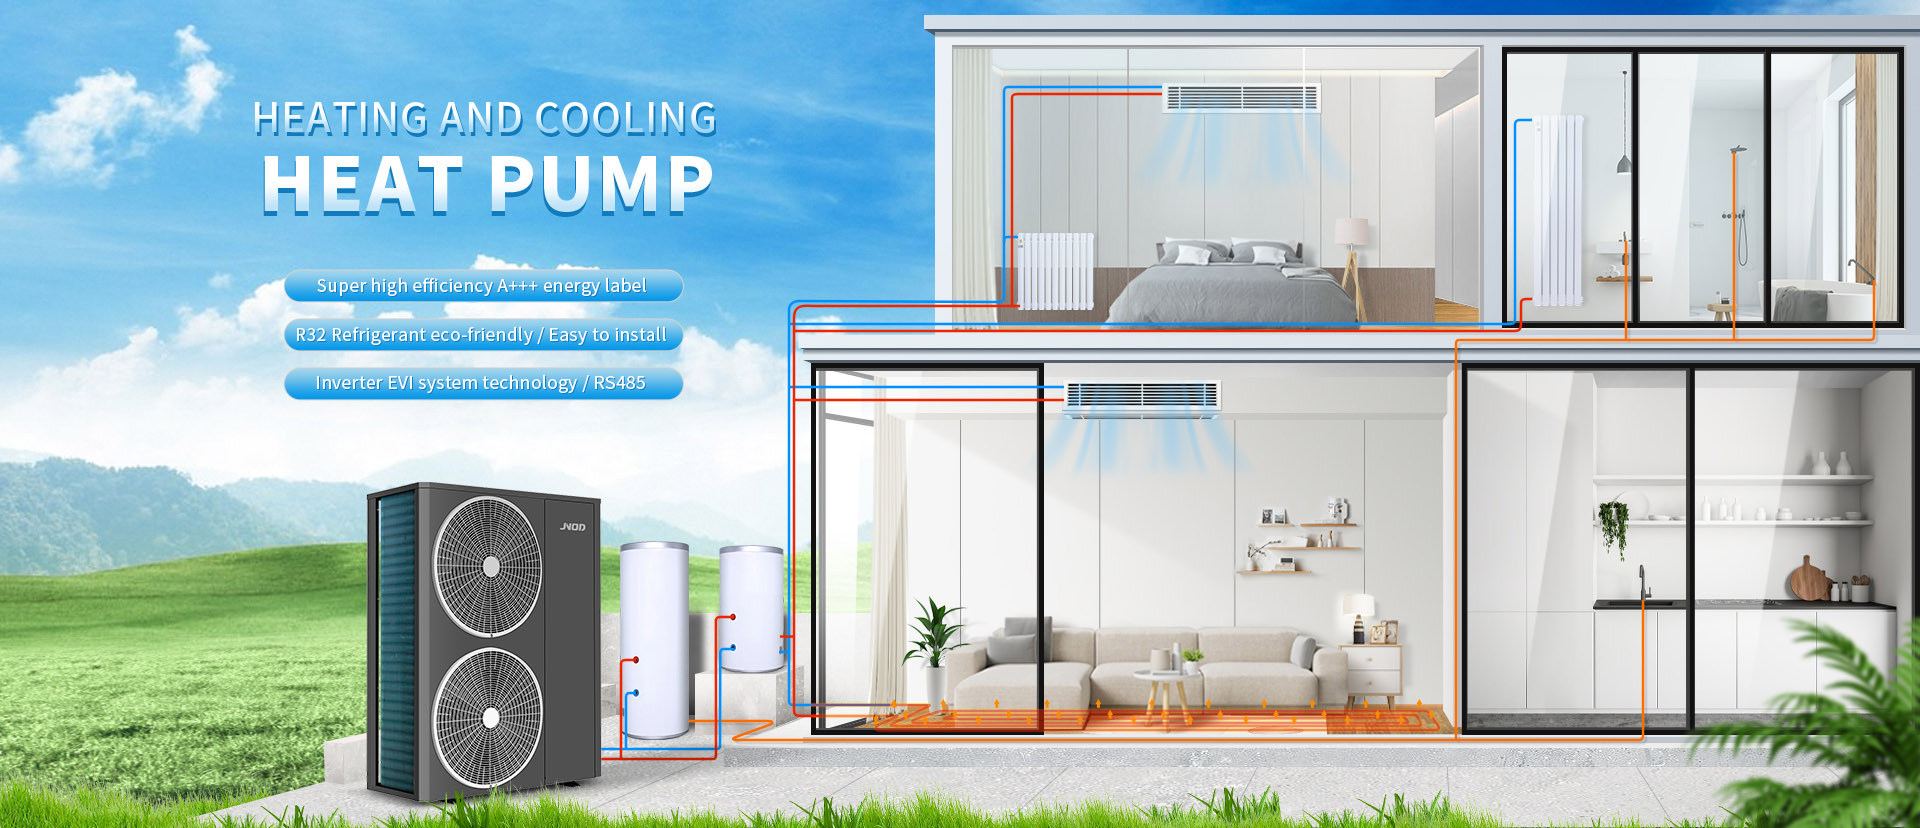 Air Flow Heating And Cooling Heat Pump